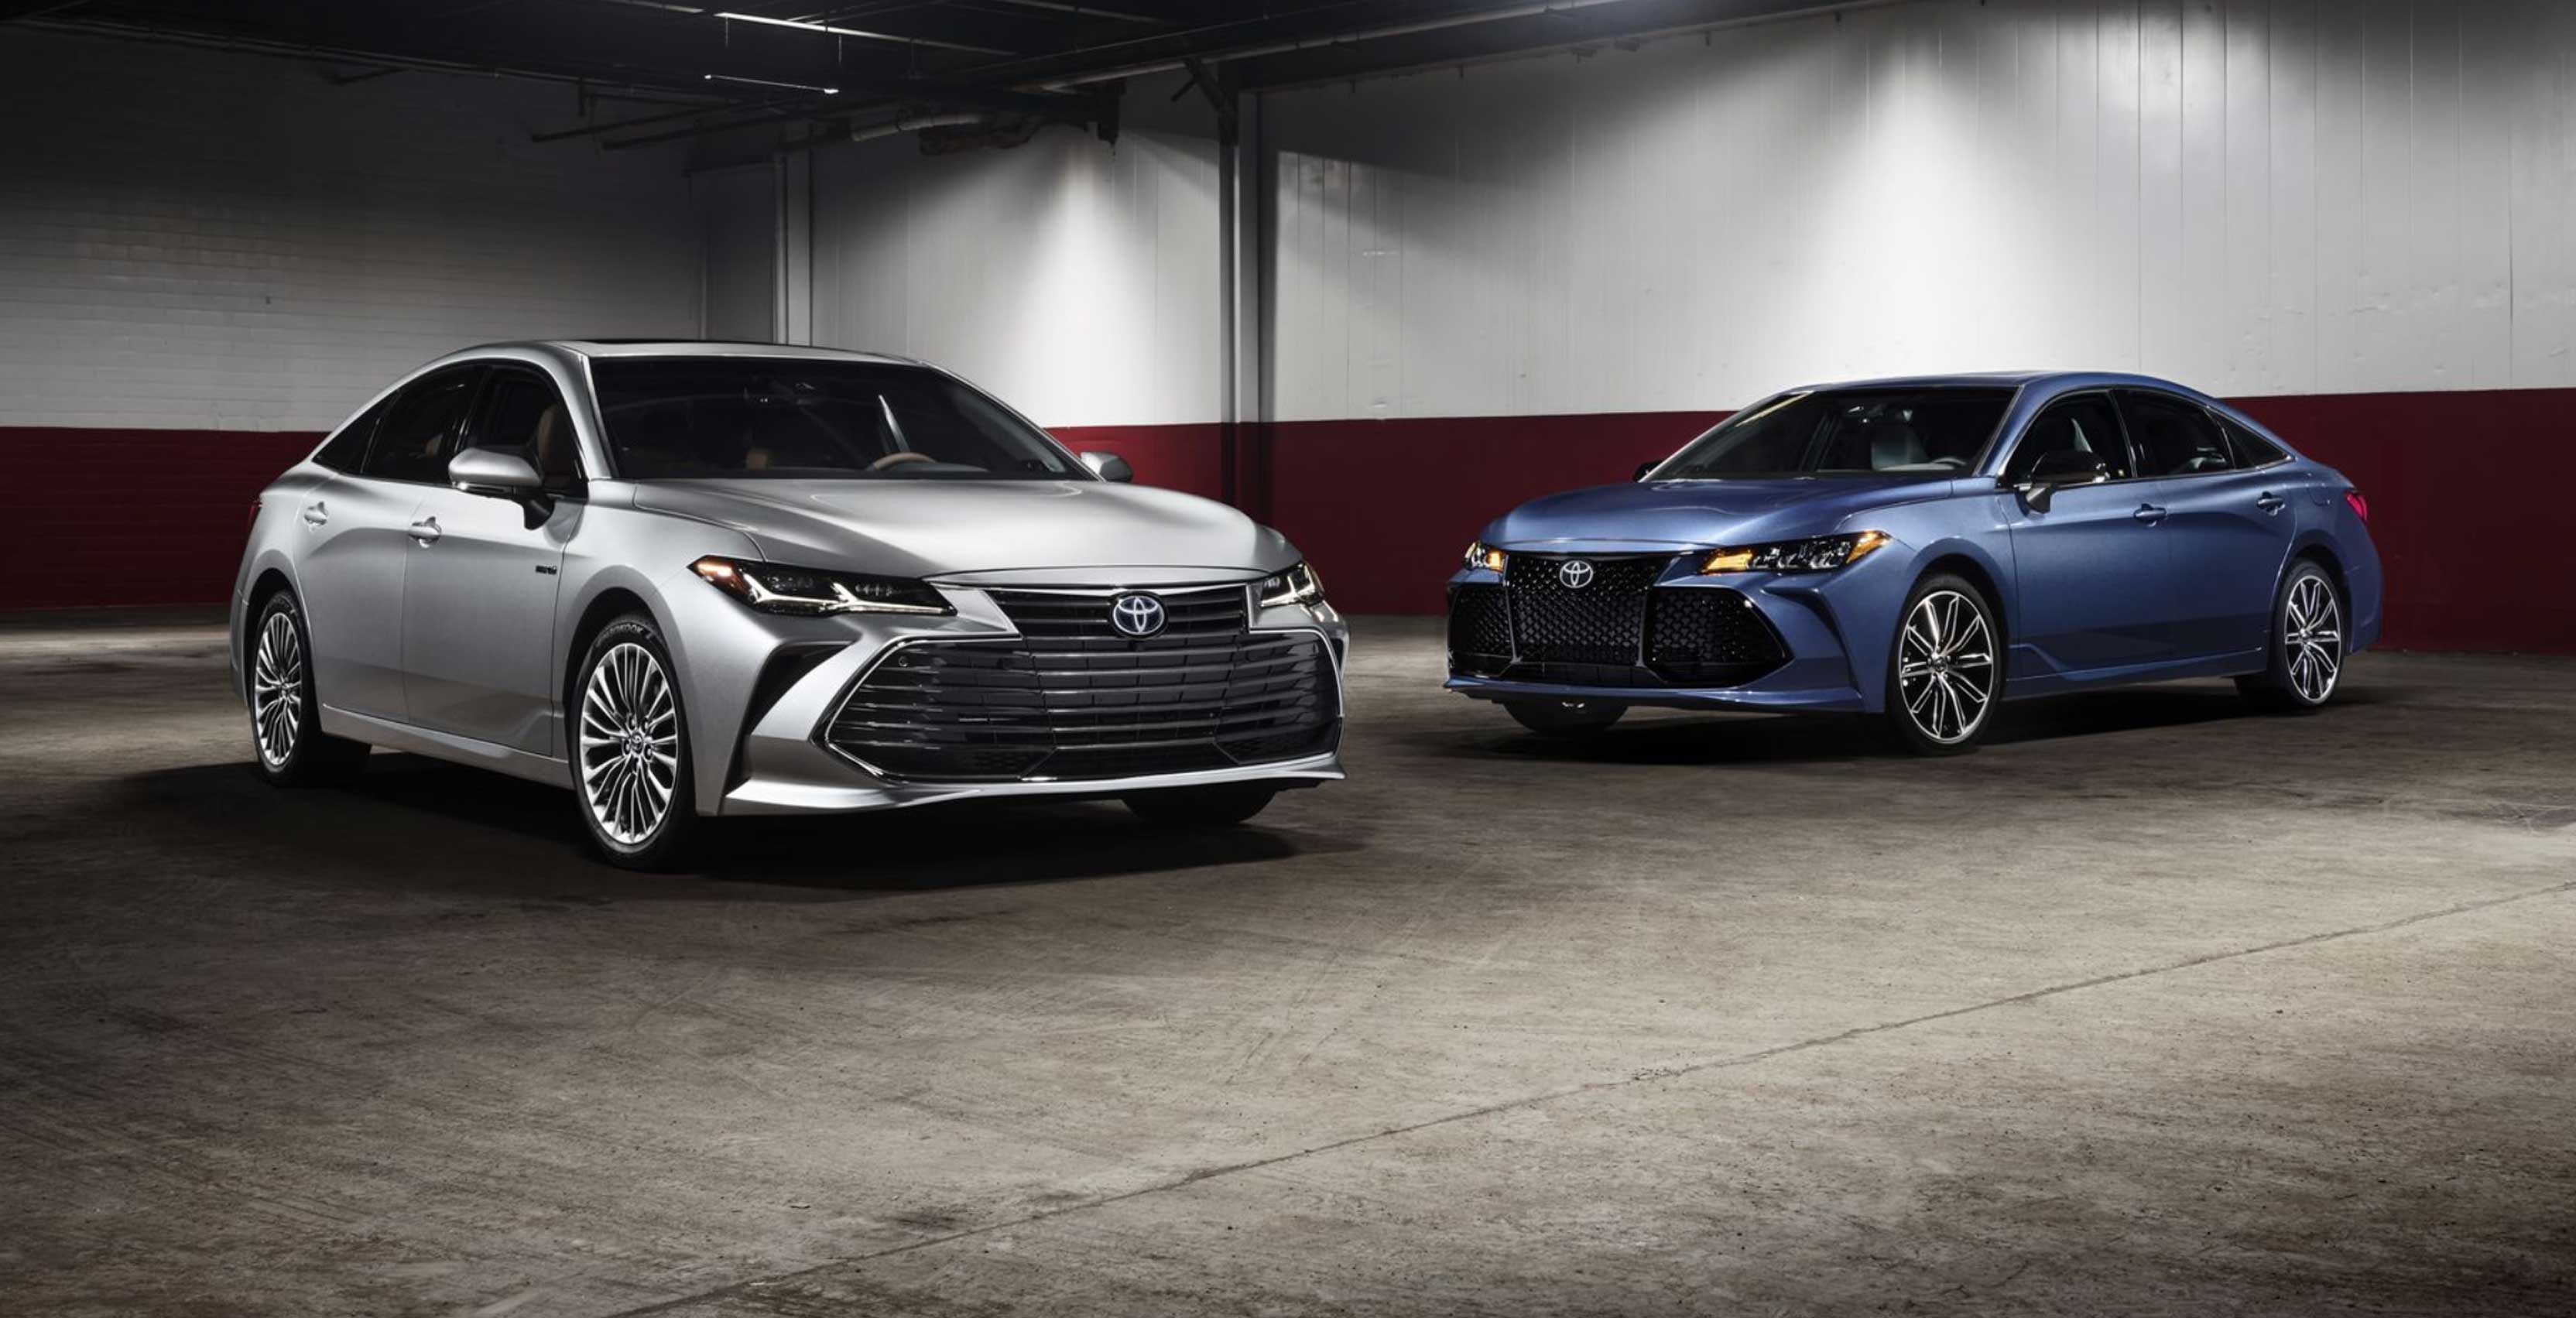 The 2019 Avalon will be the first Toyota car to support Apple's CarPlay infotainment platform